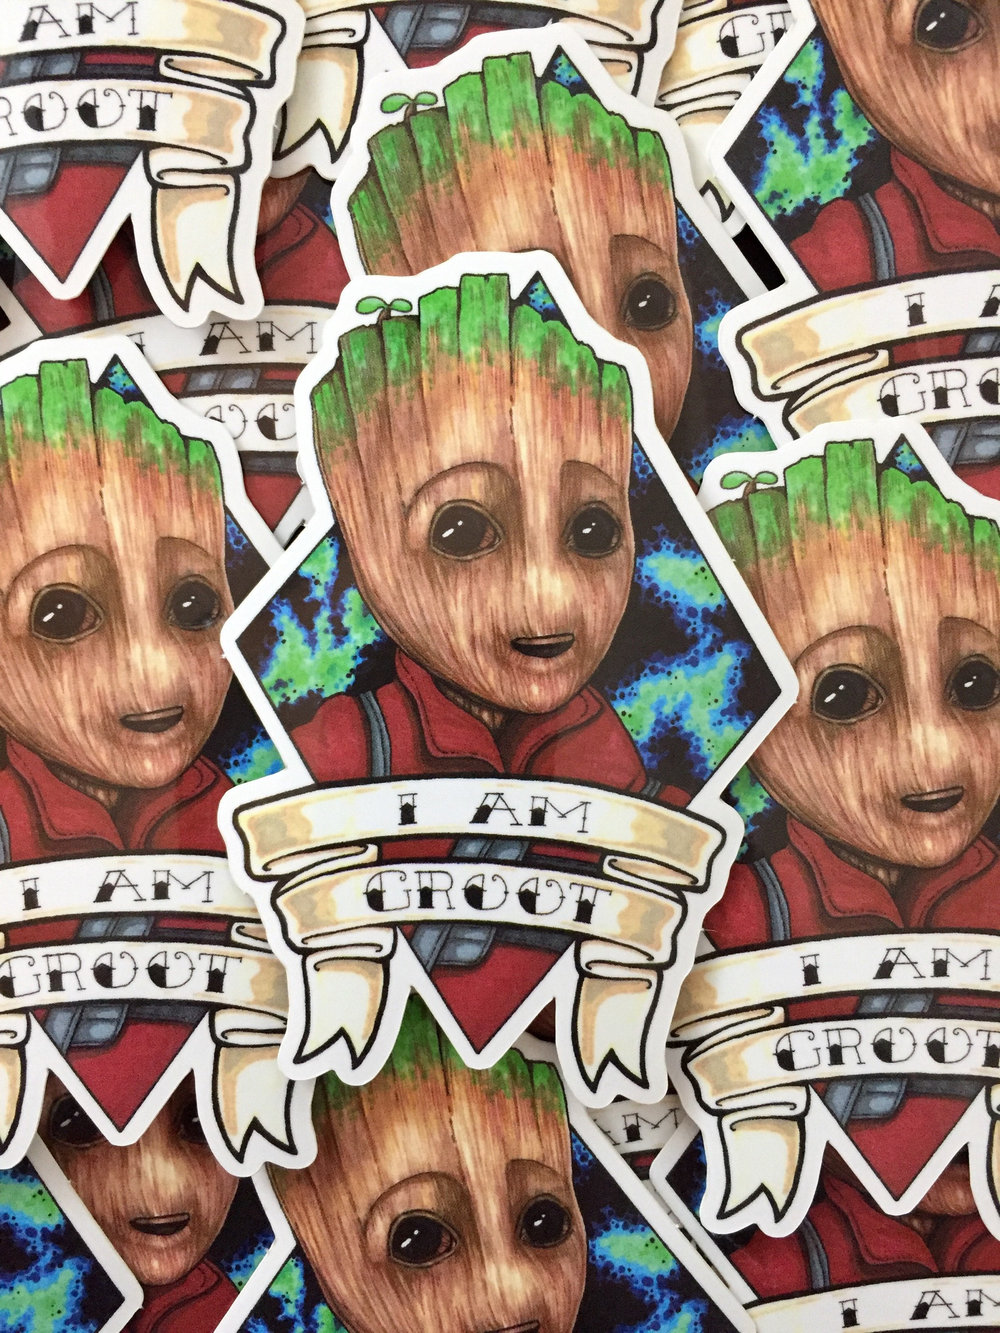 I Am Baby Groot Guardians of the Galaxy Vinyl Sticker Decal 